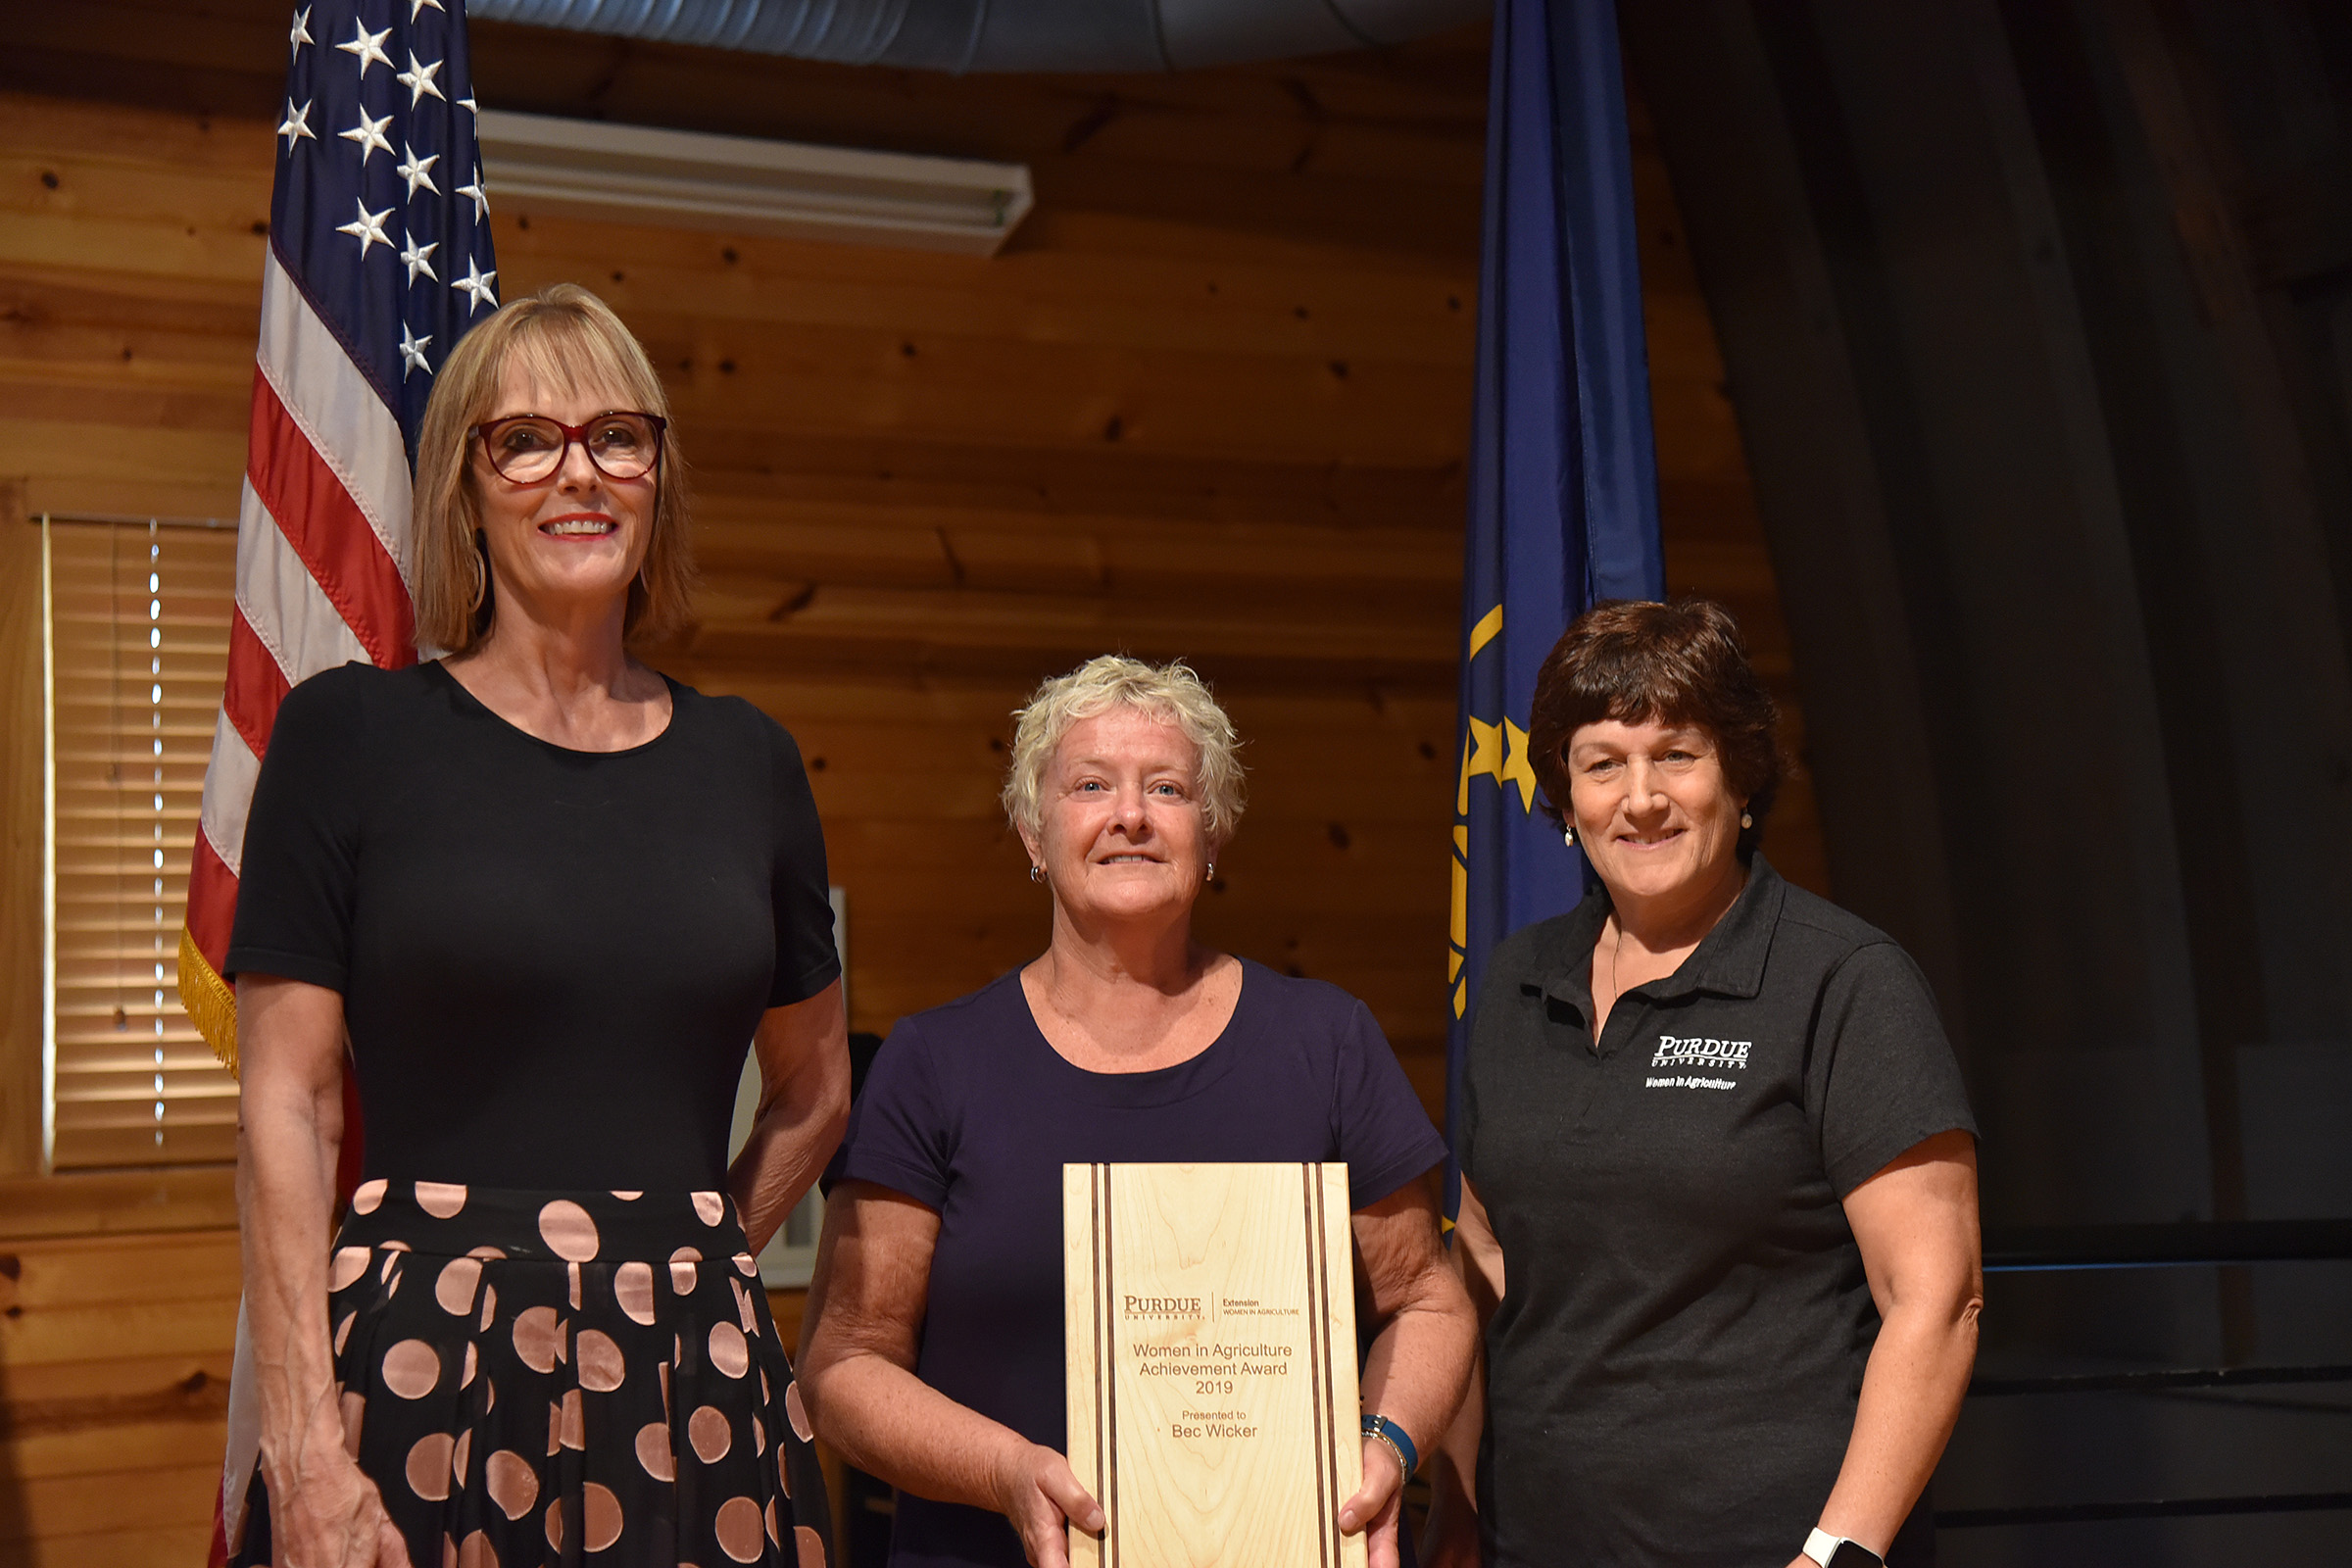 Suzanne Crouch, Bec Wicker and Karen Plut with the Women in Agriculture Award